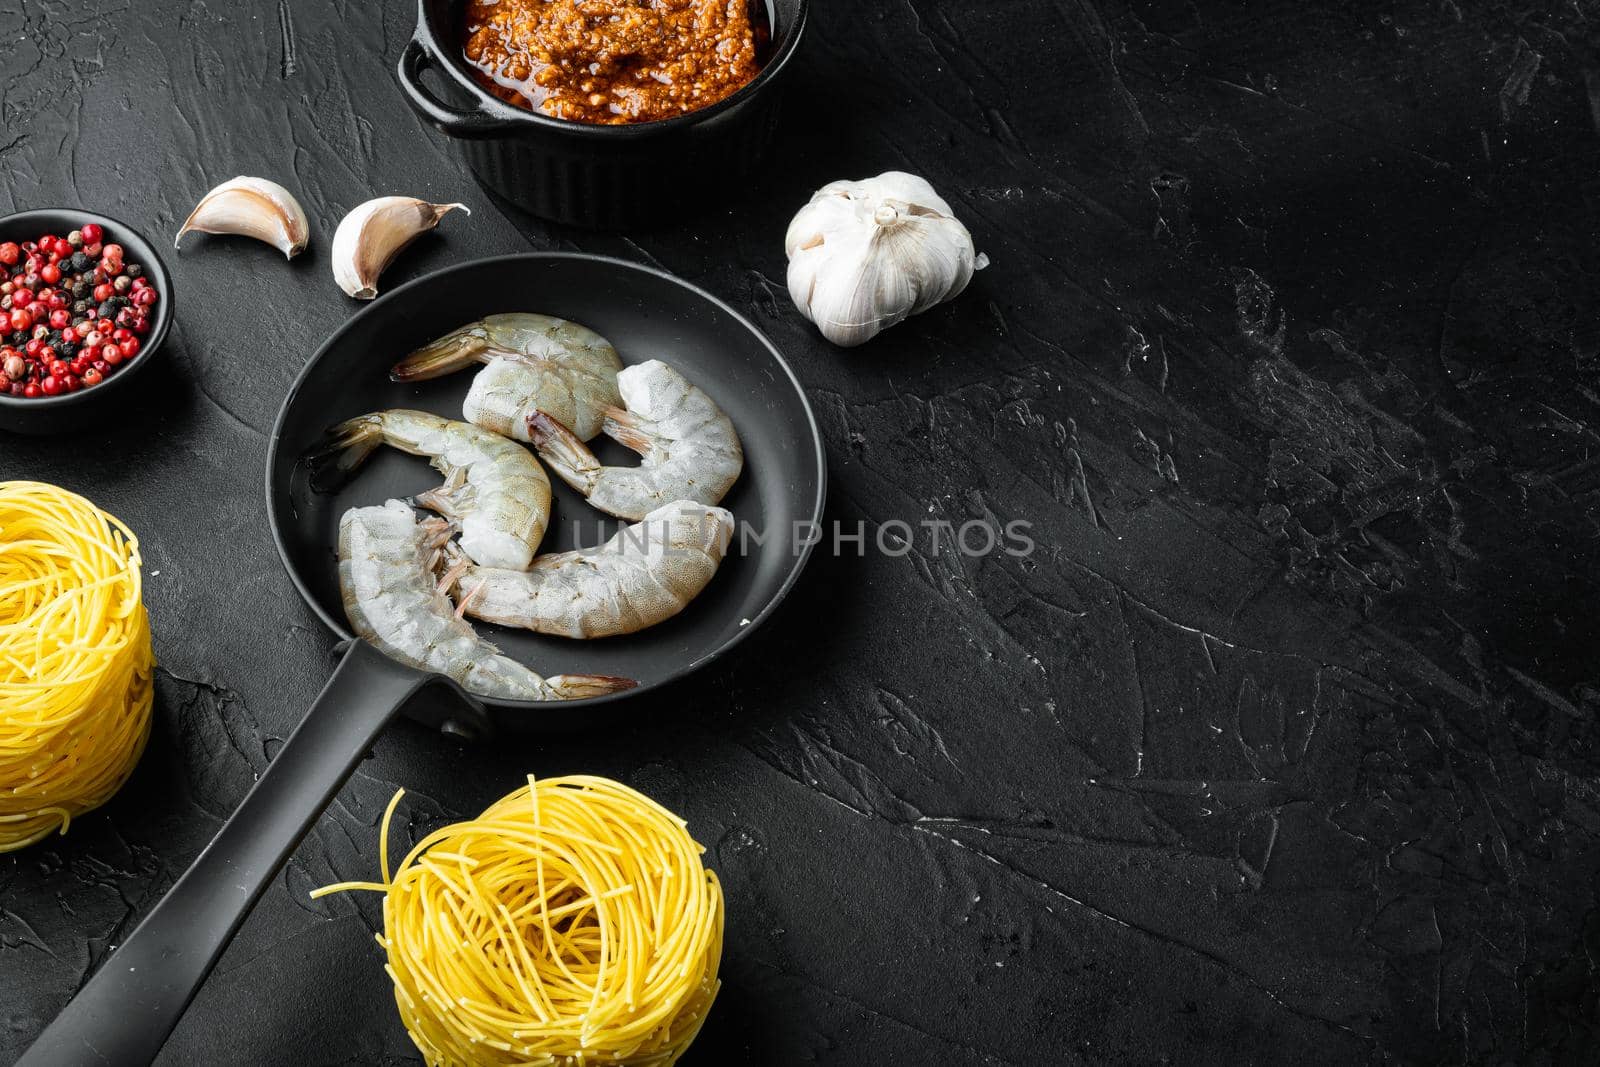 Traditional Italian dish. pasta with pesto ricotta parmesan and grilled seafood ingredients, on black stone background, with copy space for text by Ilianesolenyi